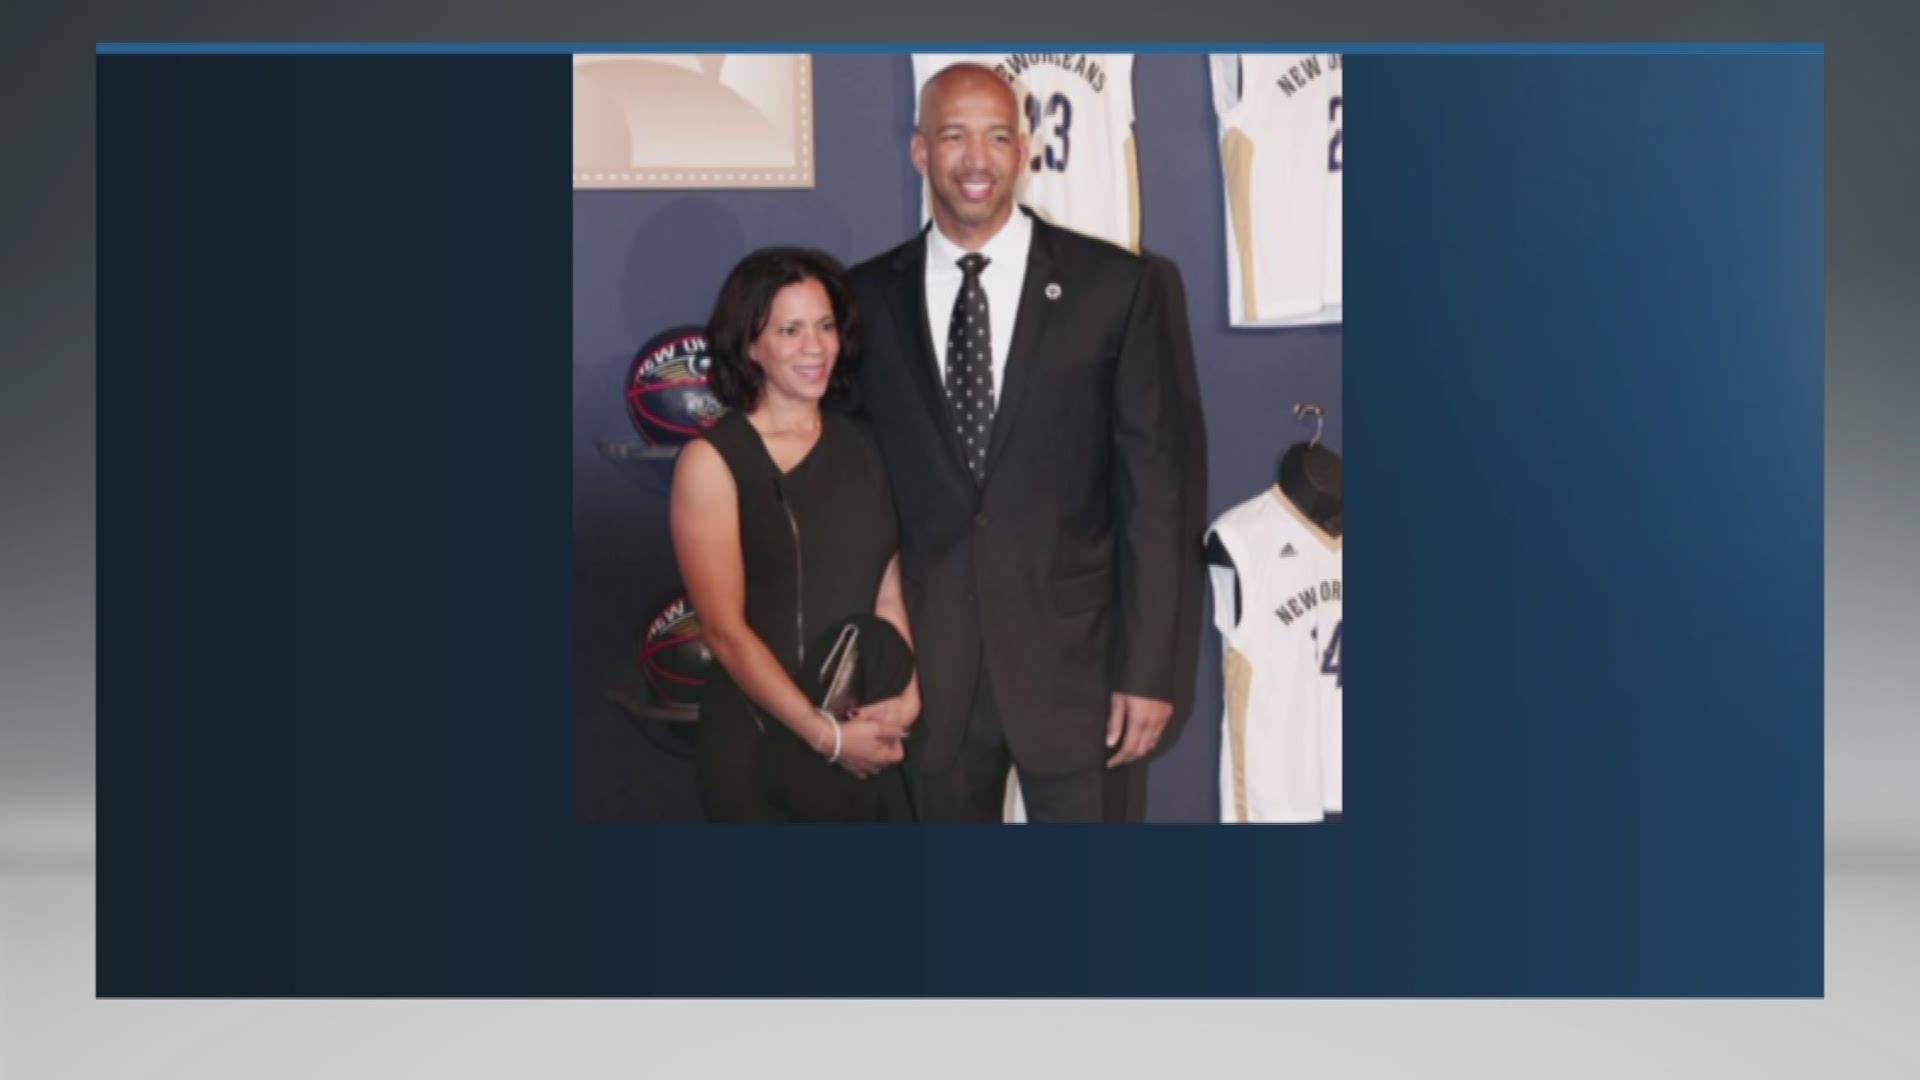 Ingrid Williams, 44, the wife of former Pelicans coach Monty Williams died in a car crash Wednesday.